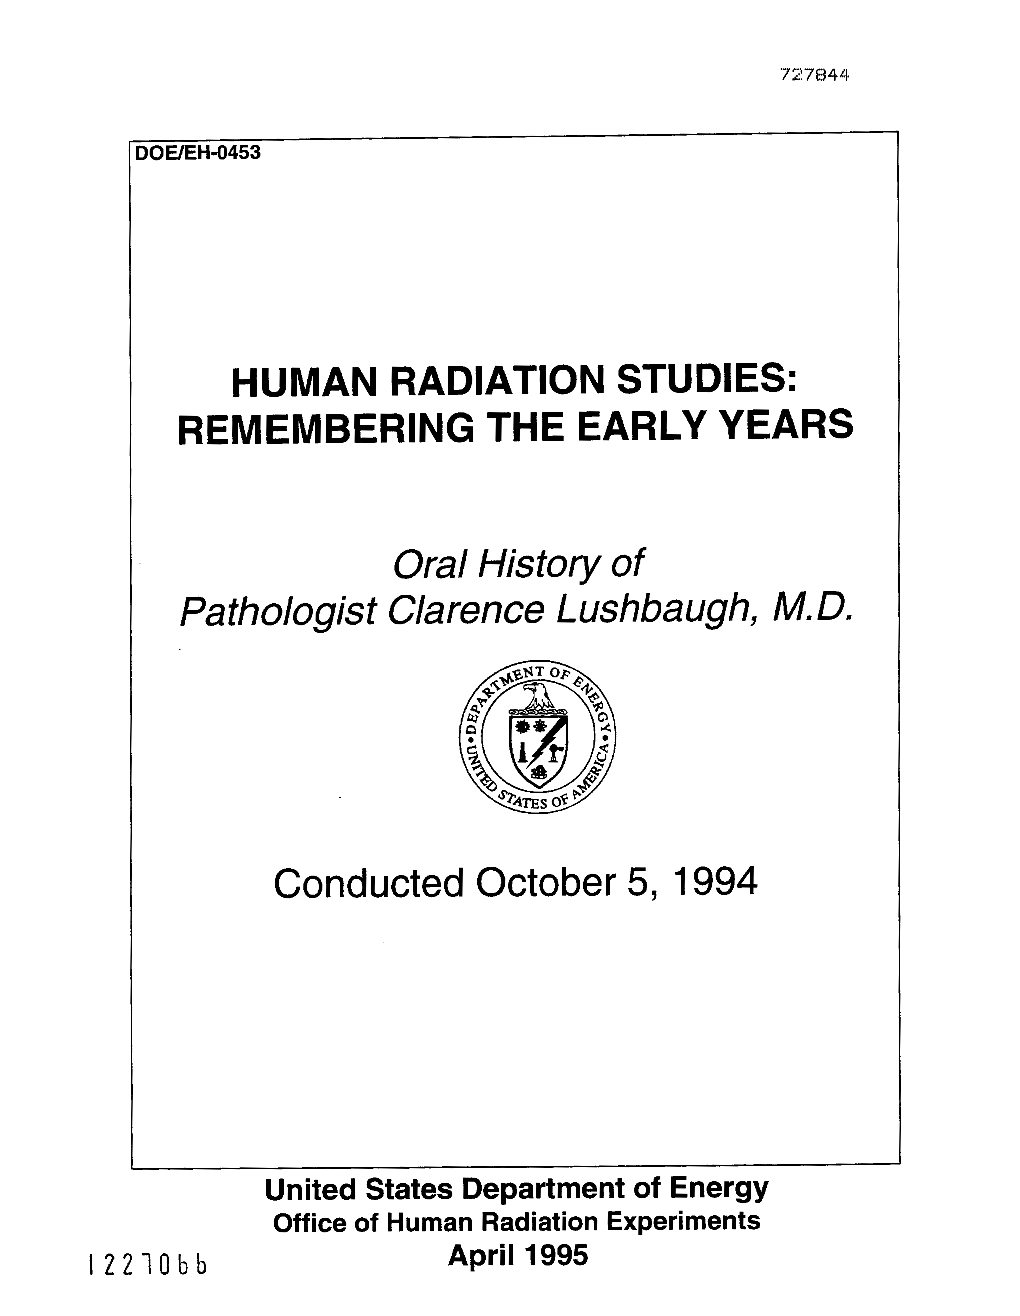 Oral History of Pathologist Clarence Lushbaugh, M.D., Conducted October